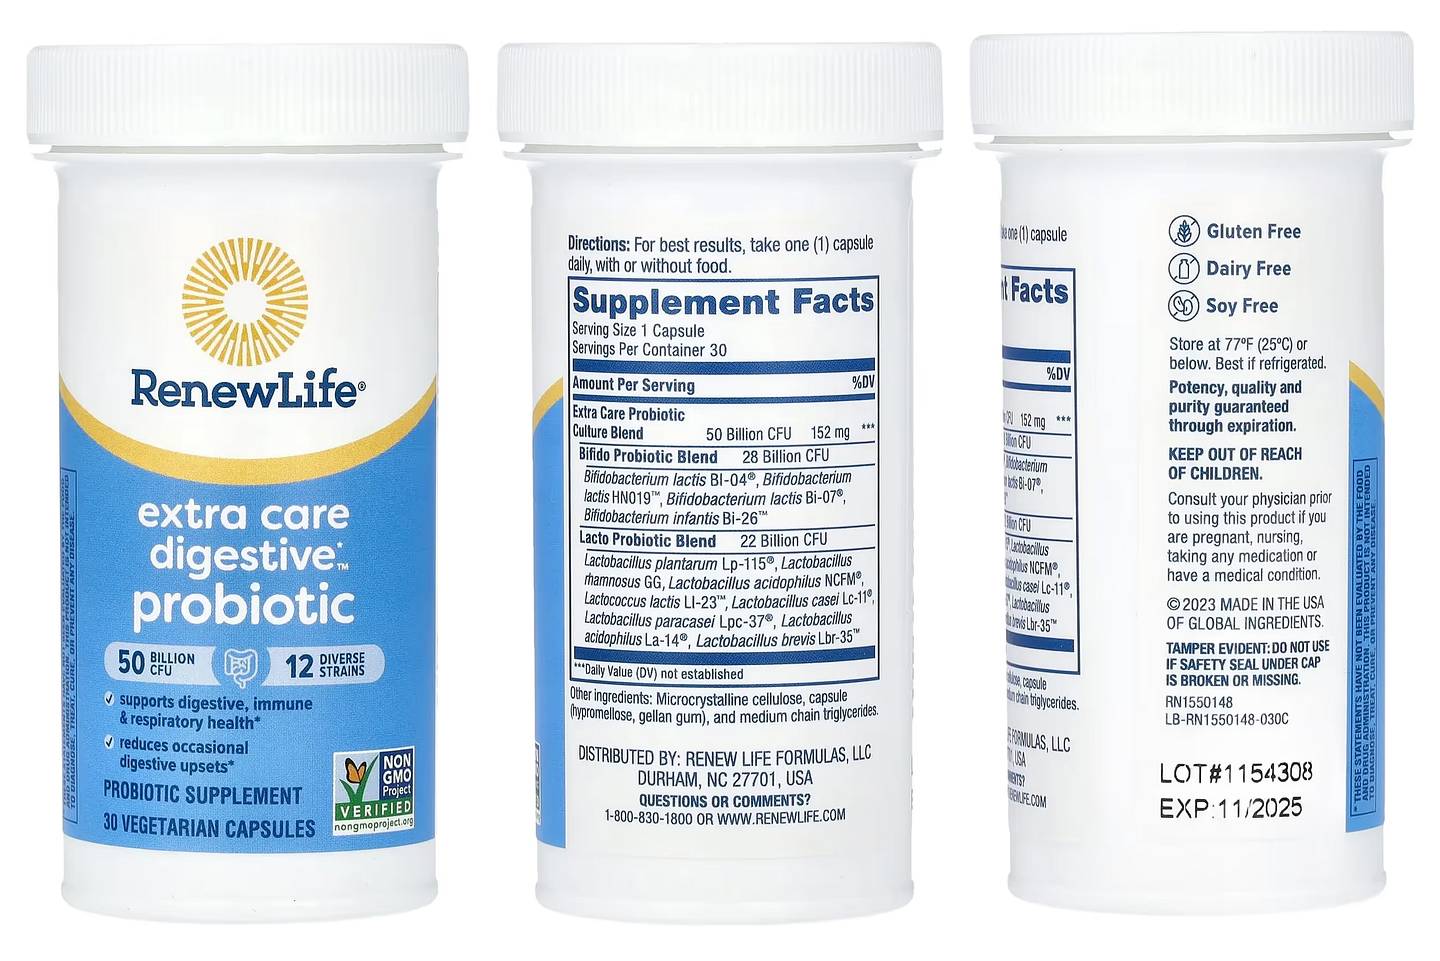 Renew Life, Extra Care Digestive Probiotic packaging